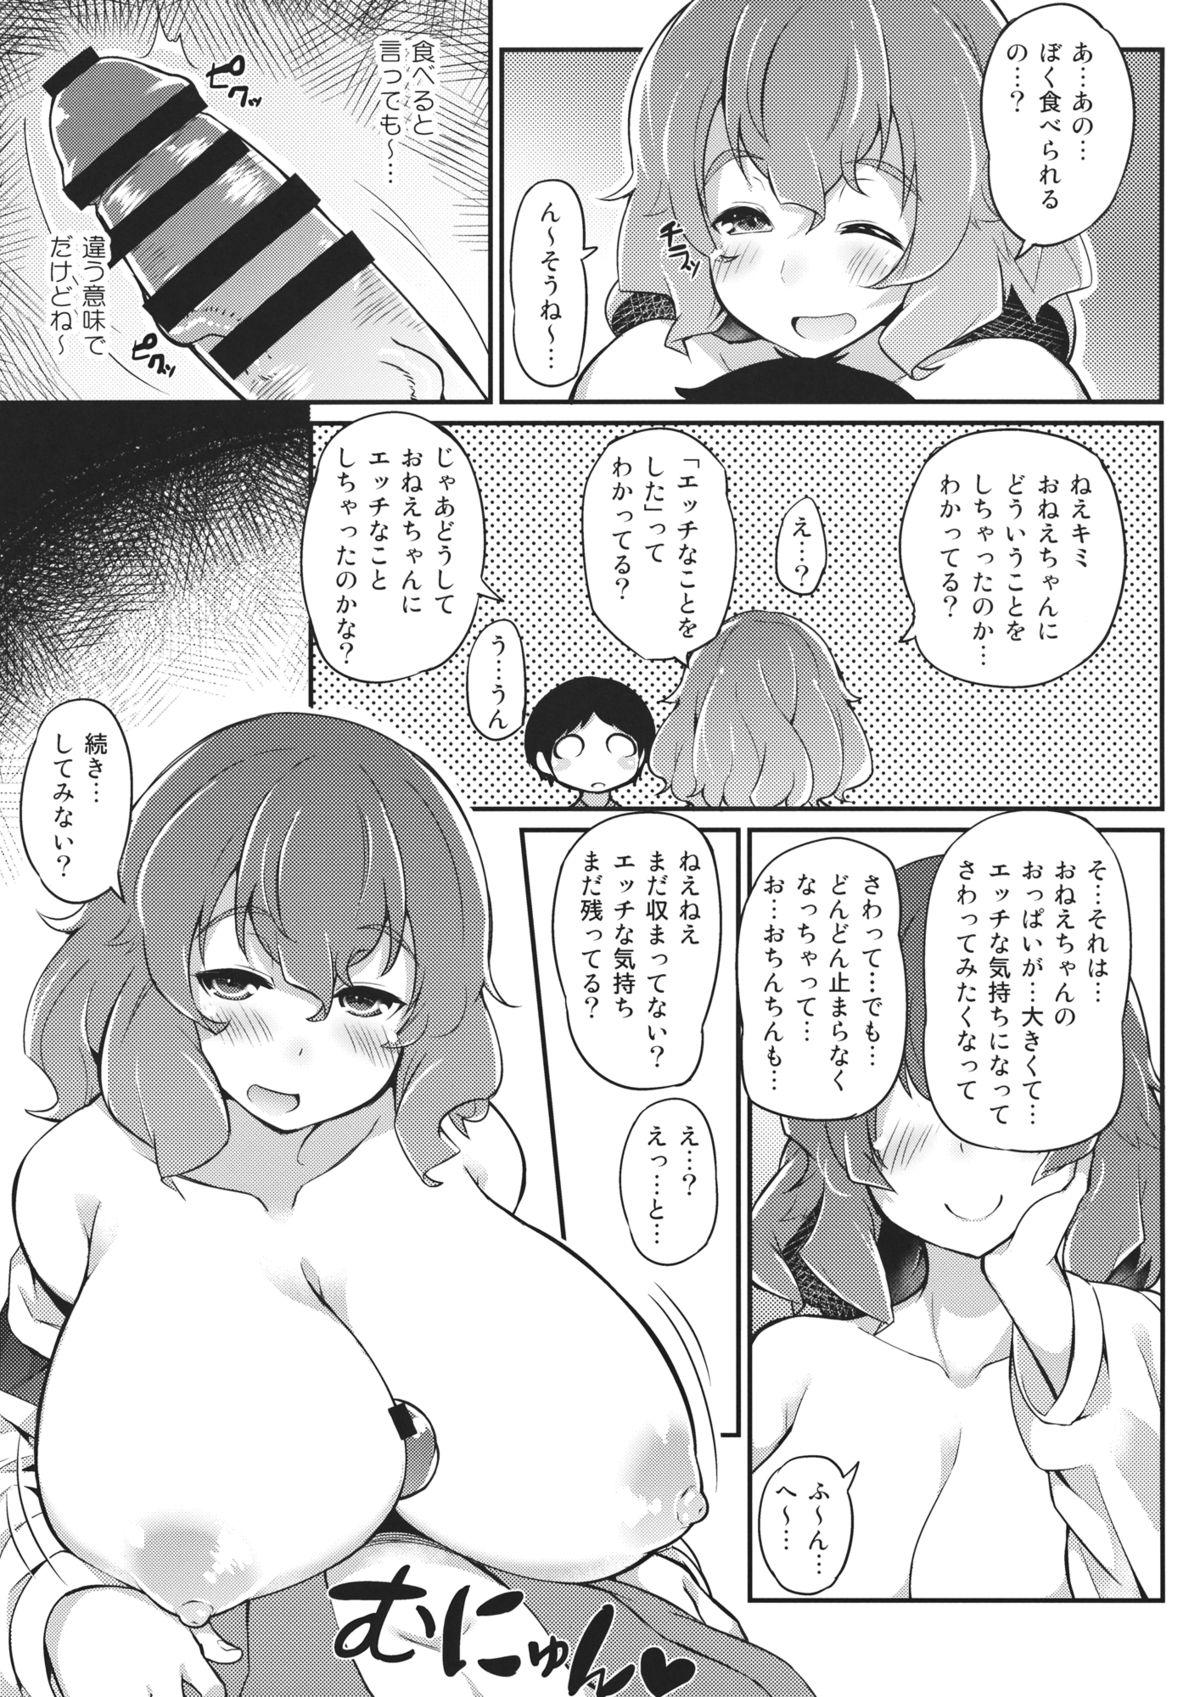 Analfuck xLetty VxV - Touhou project Cunt - Page 10